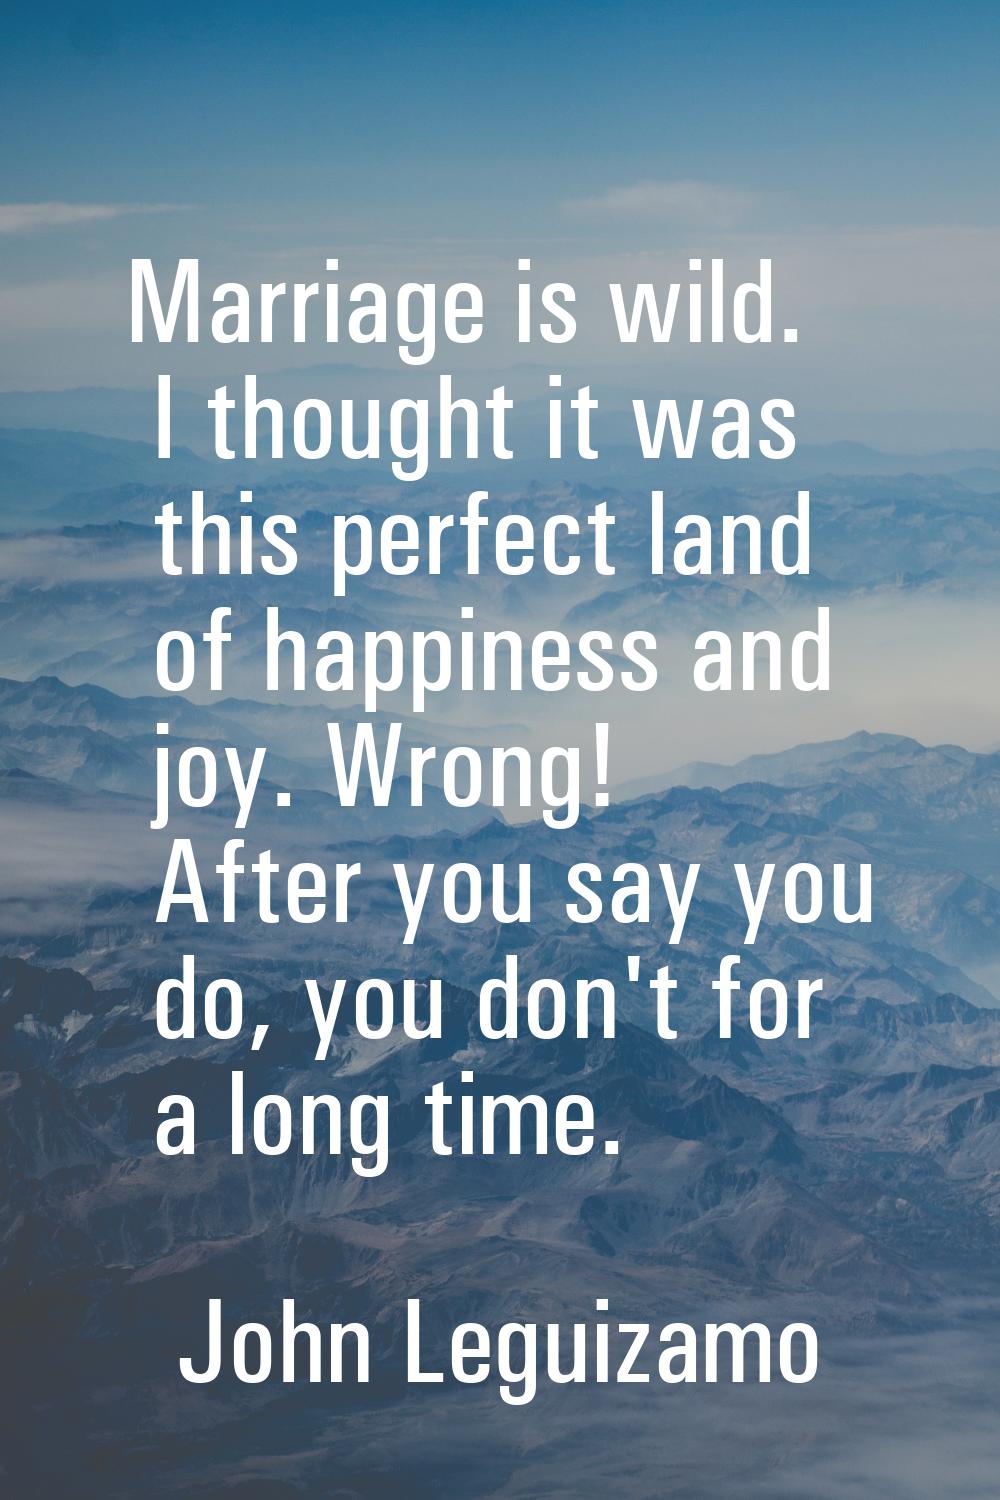 Marriage is wild. I thought it was this perfect land of happiness and joy. Wrong! After you say you